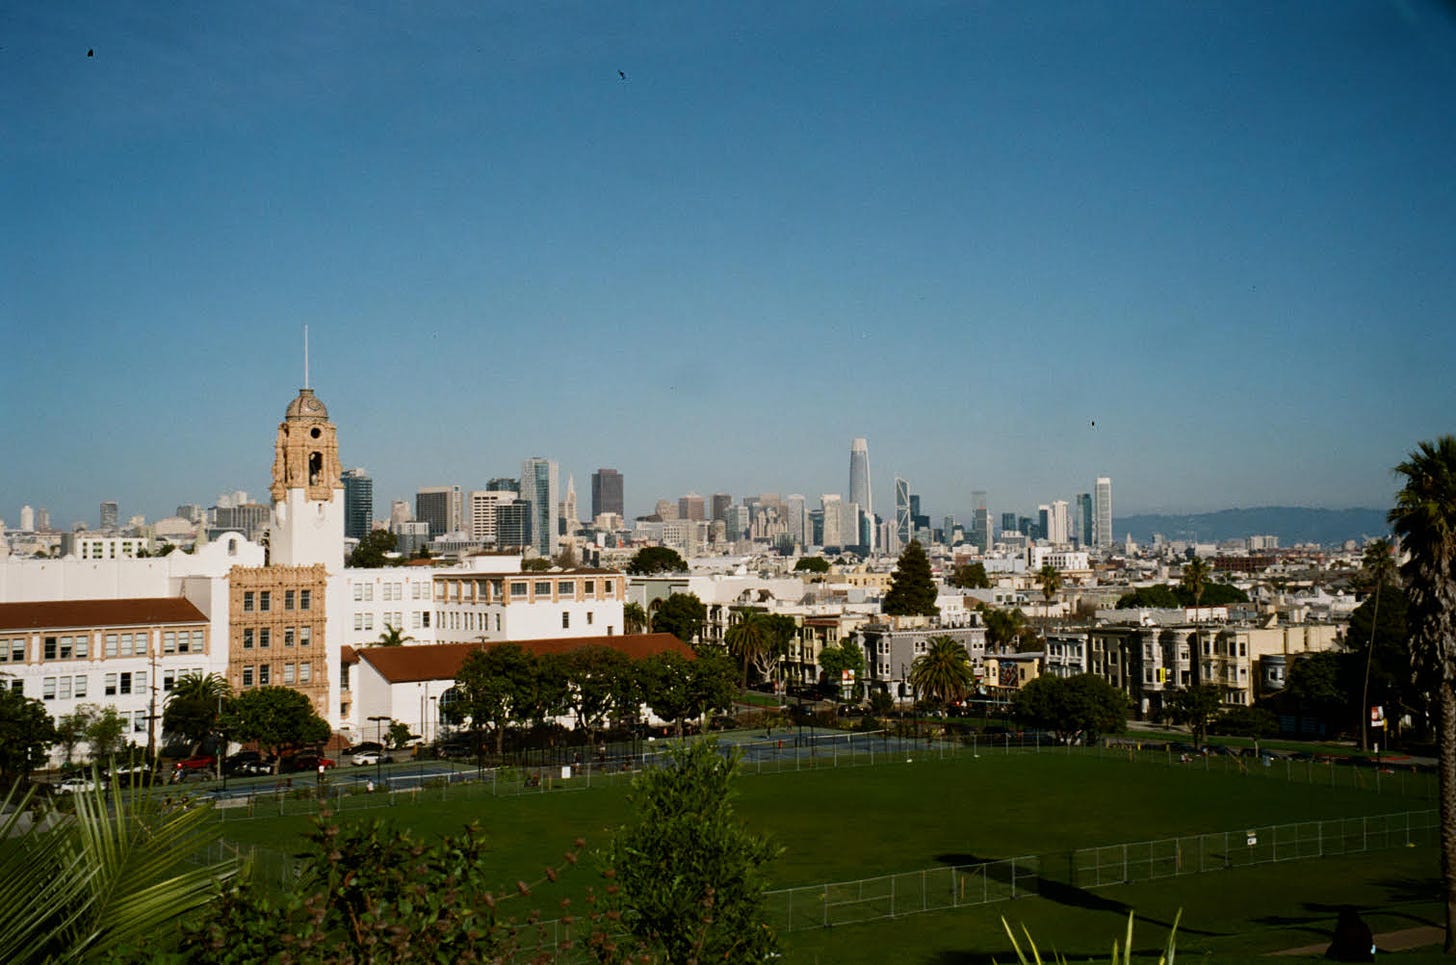 Film picture of Mission Dolores Park, in San Francisco, overlooking the city's skyline